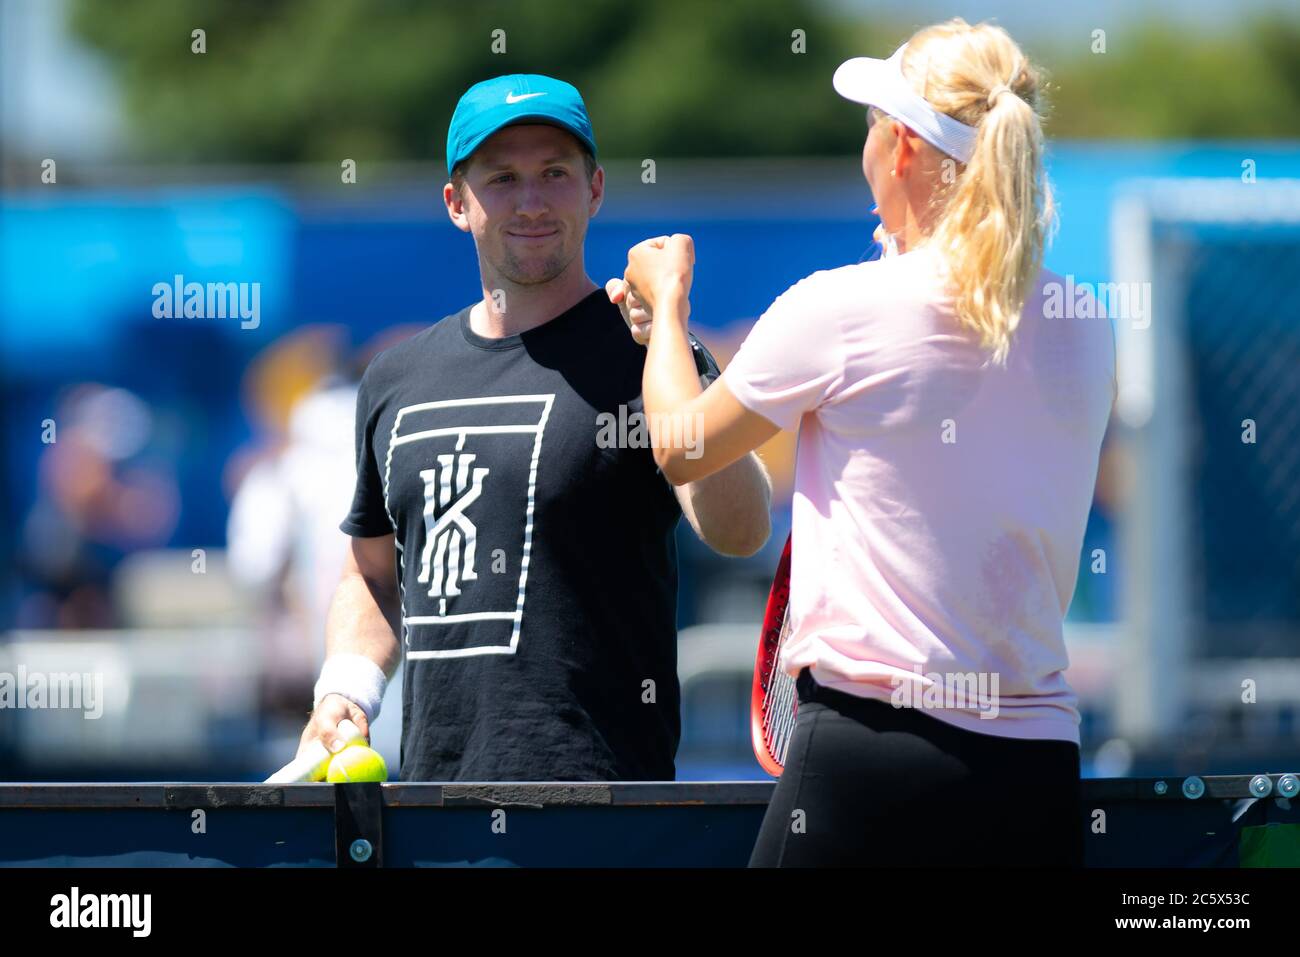 Tom Hill during practice at the 2019 Mubadala Silicon Valley Classic Premier Tennis Tournament Stock Photo